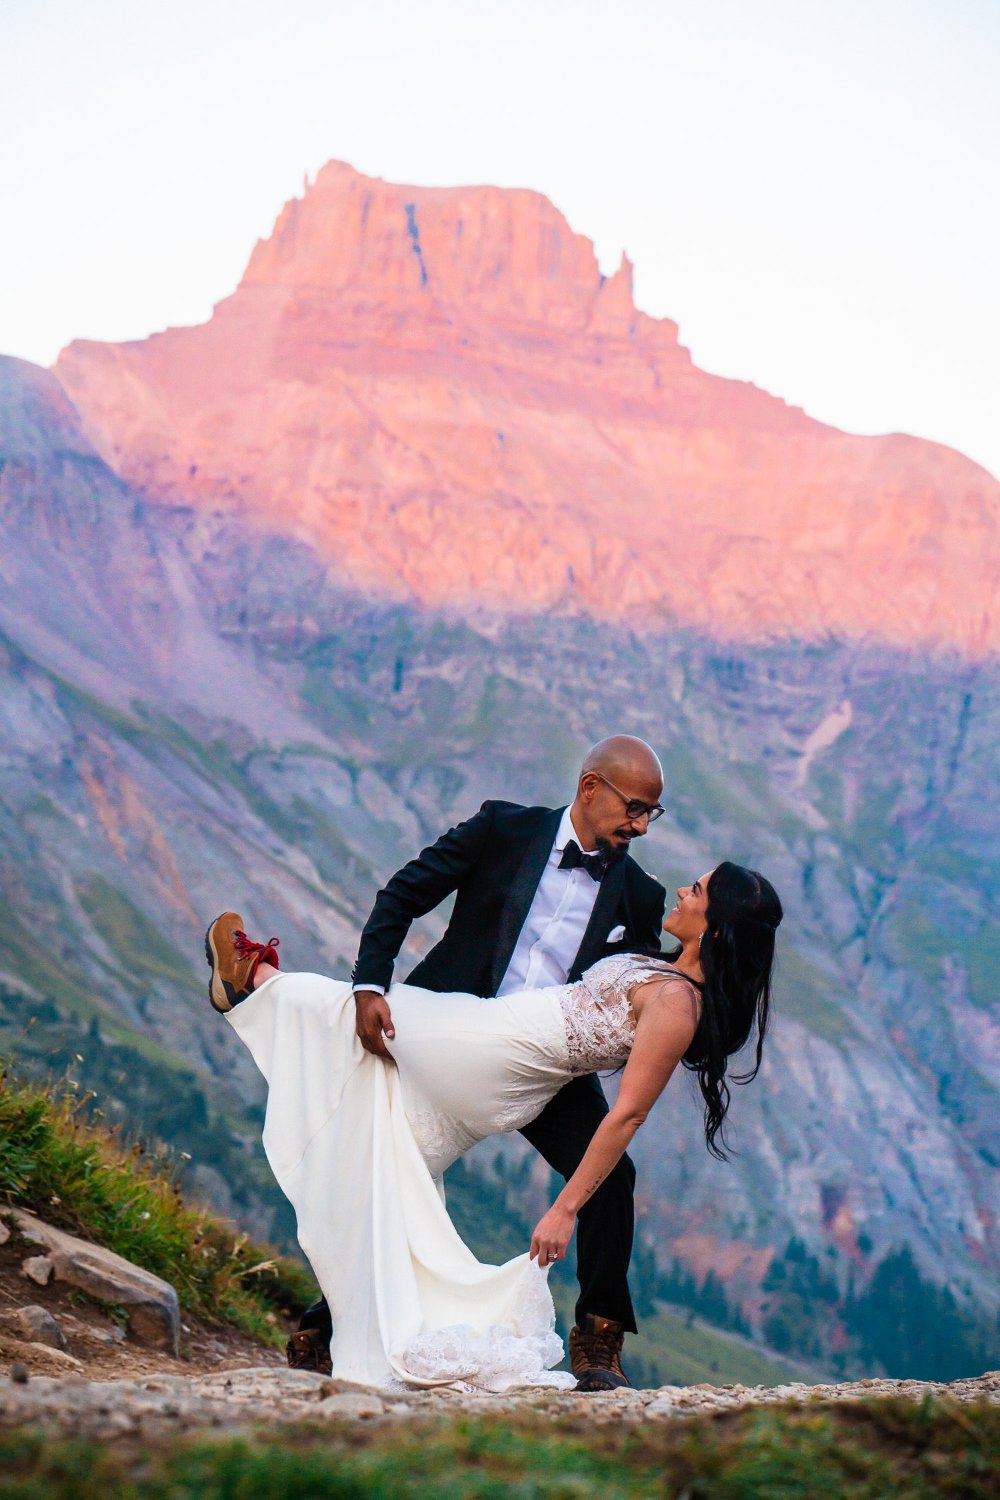 A couple's elopement photos capture them posing in front of a breathtaking mountain backdrop on their special day.